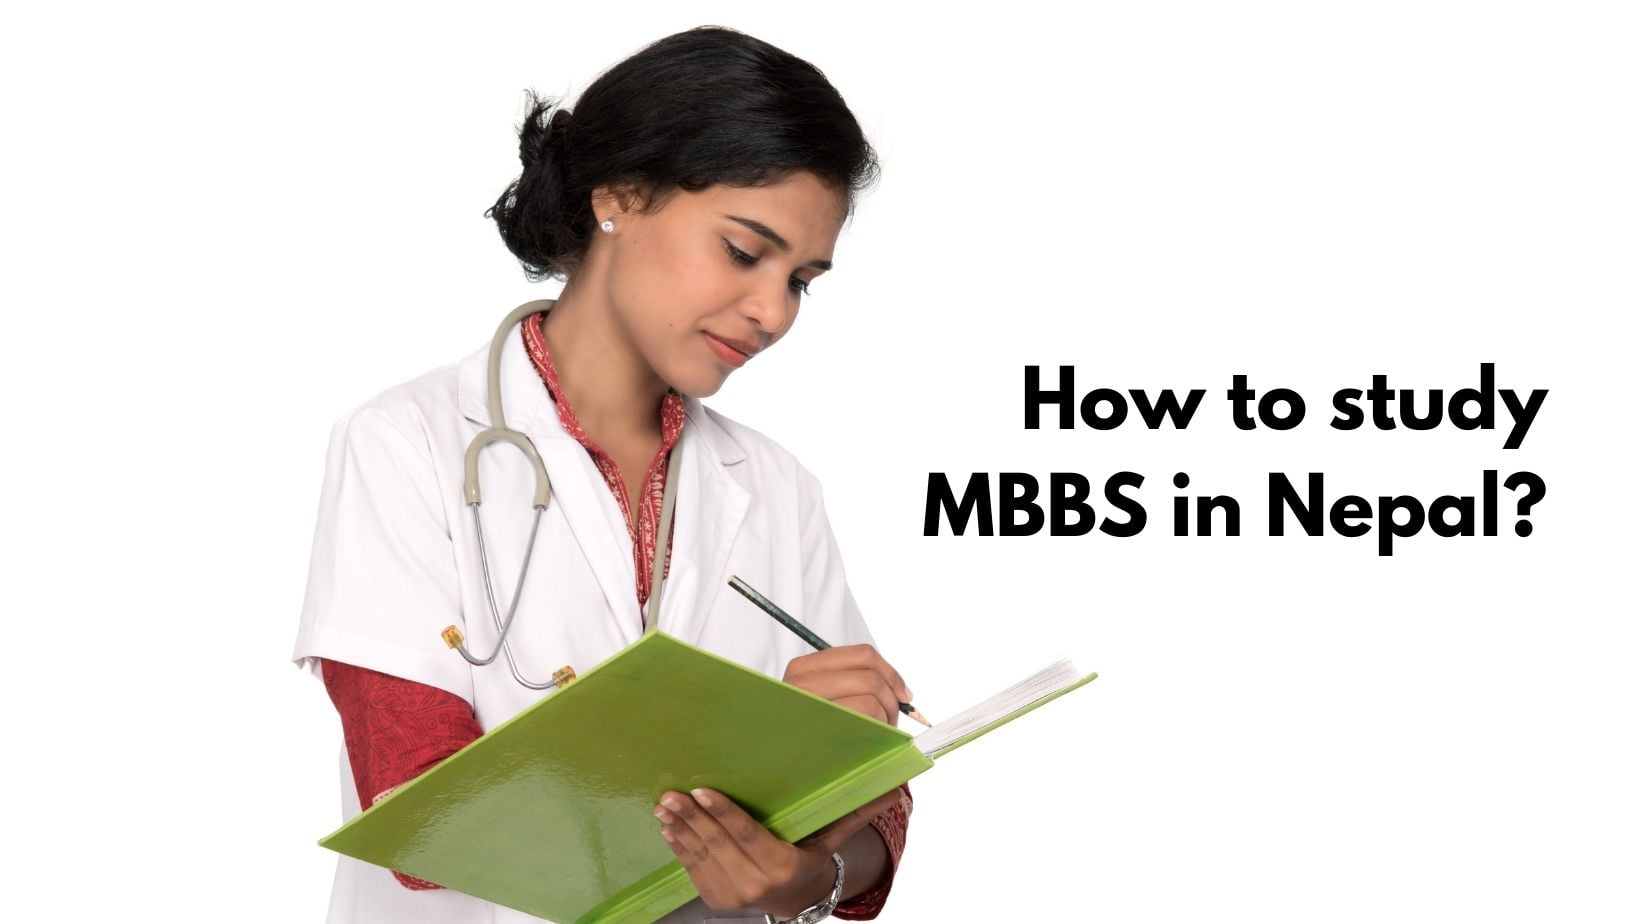 How To Study MBBS In Nepal?